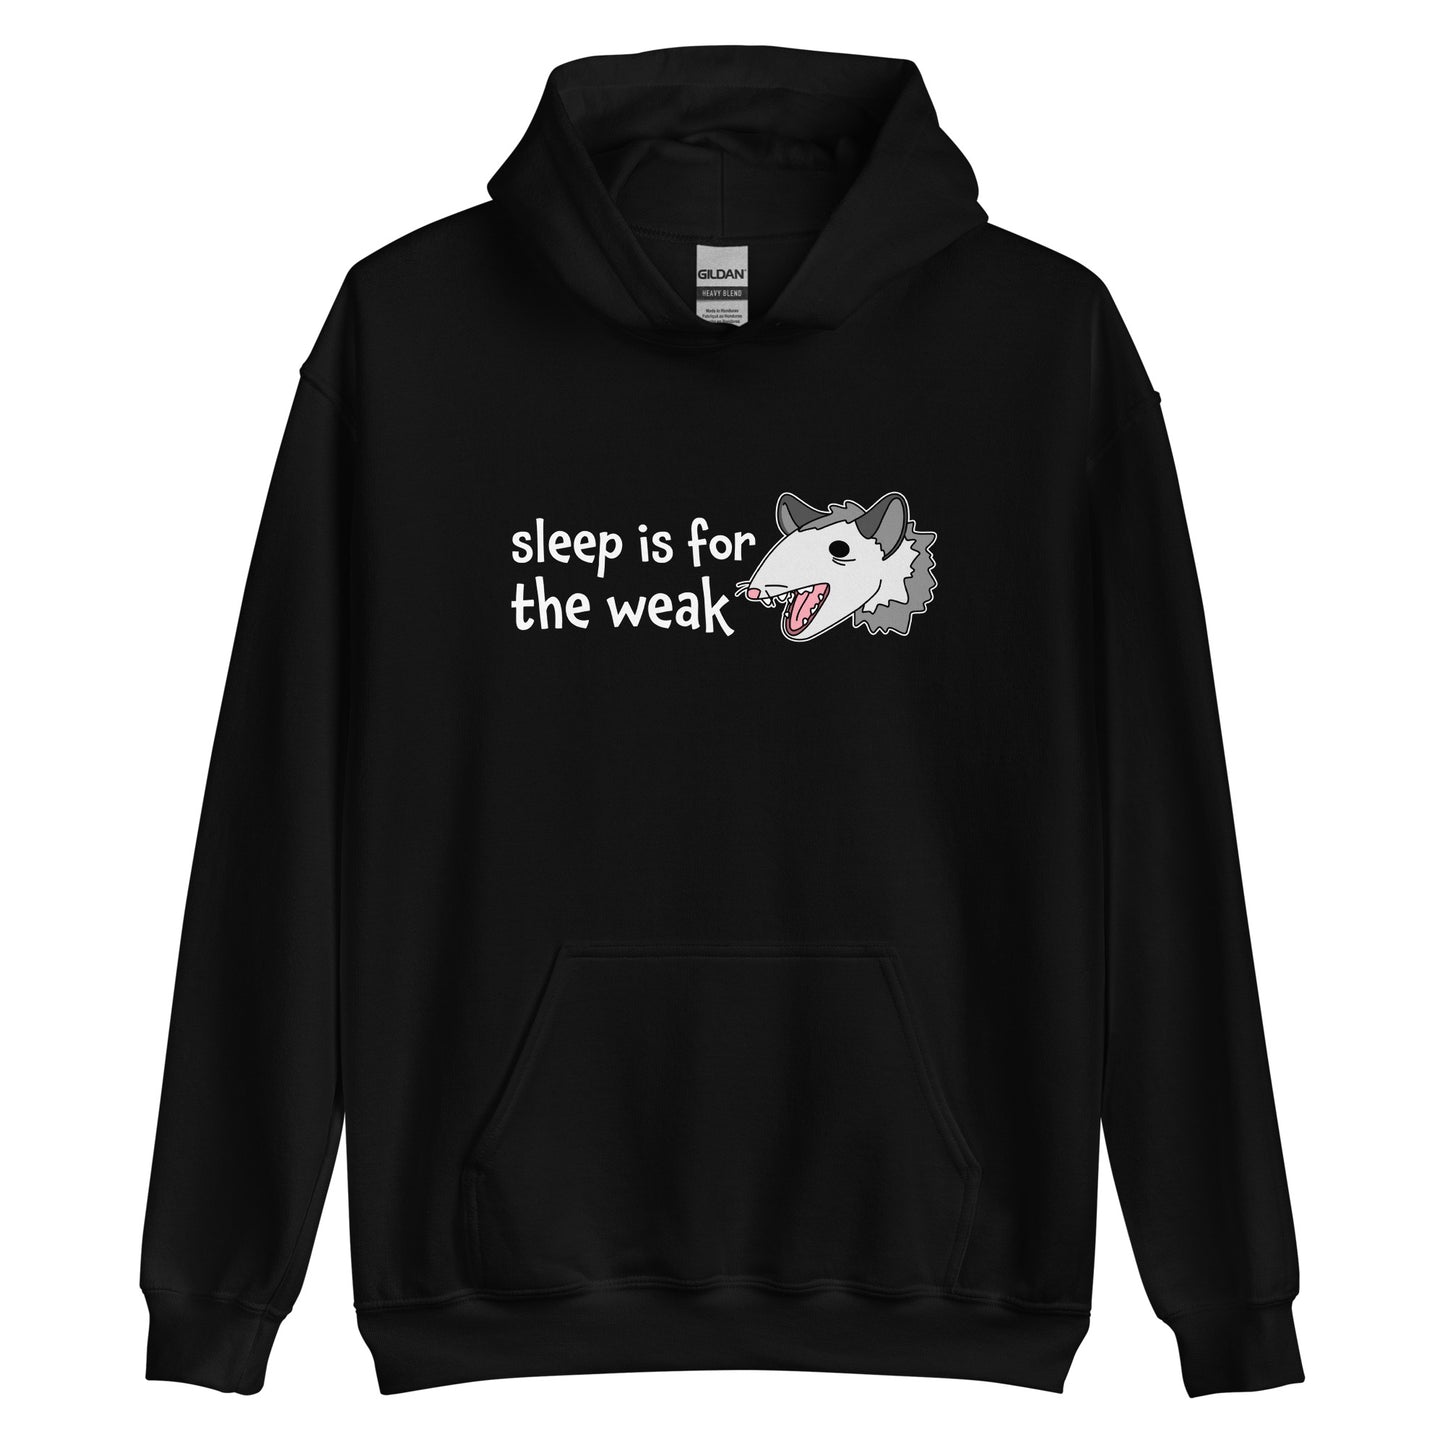 A black hooded sweatshirt featuring an illustration of an opossum with its mouth open, as if it was yelling. Text to the left of the opossum reads "sleep is for the weak"